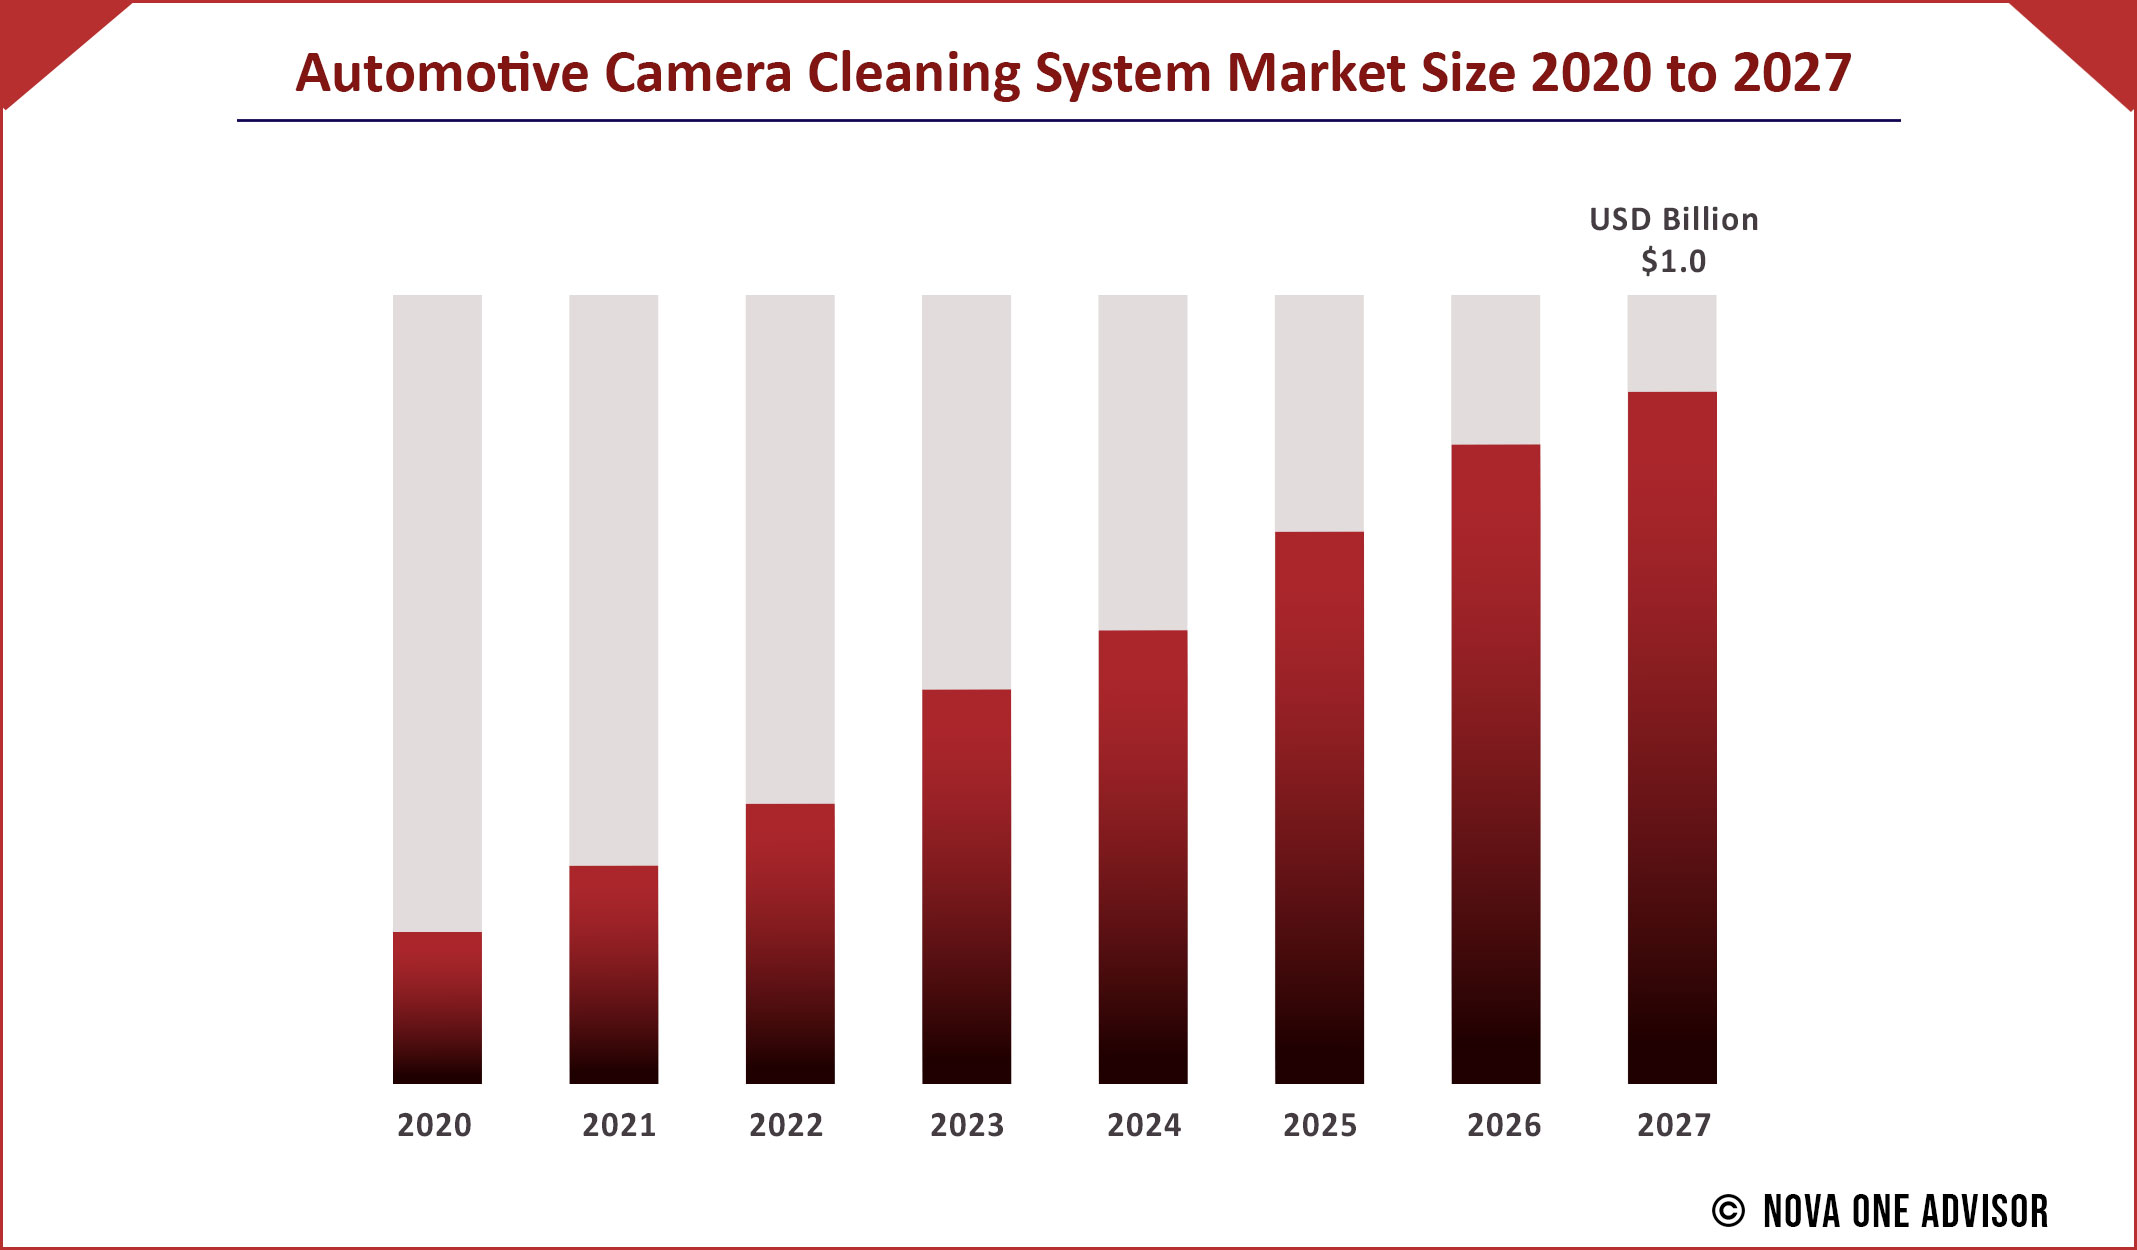 Automotive Camera Cleaning System Market Size 2020 to 2027